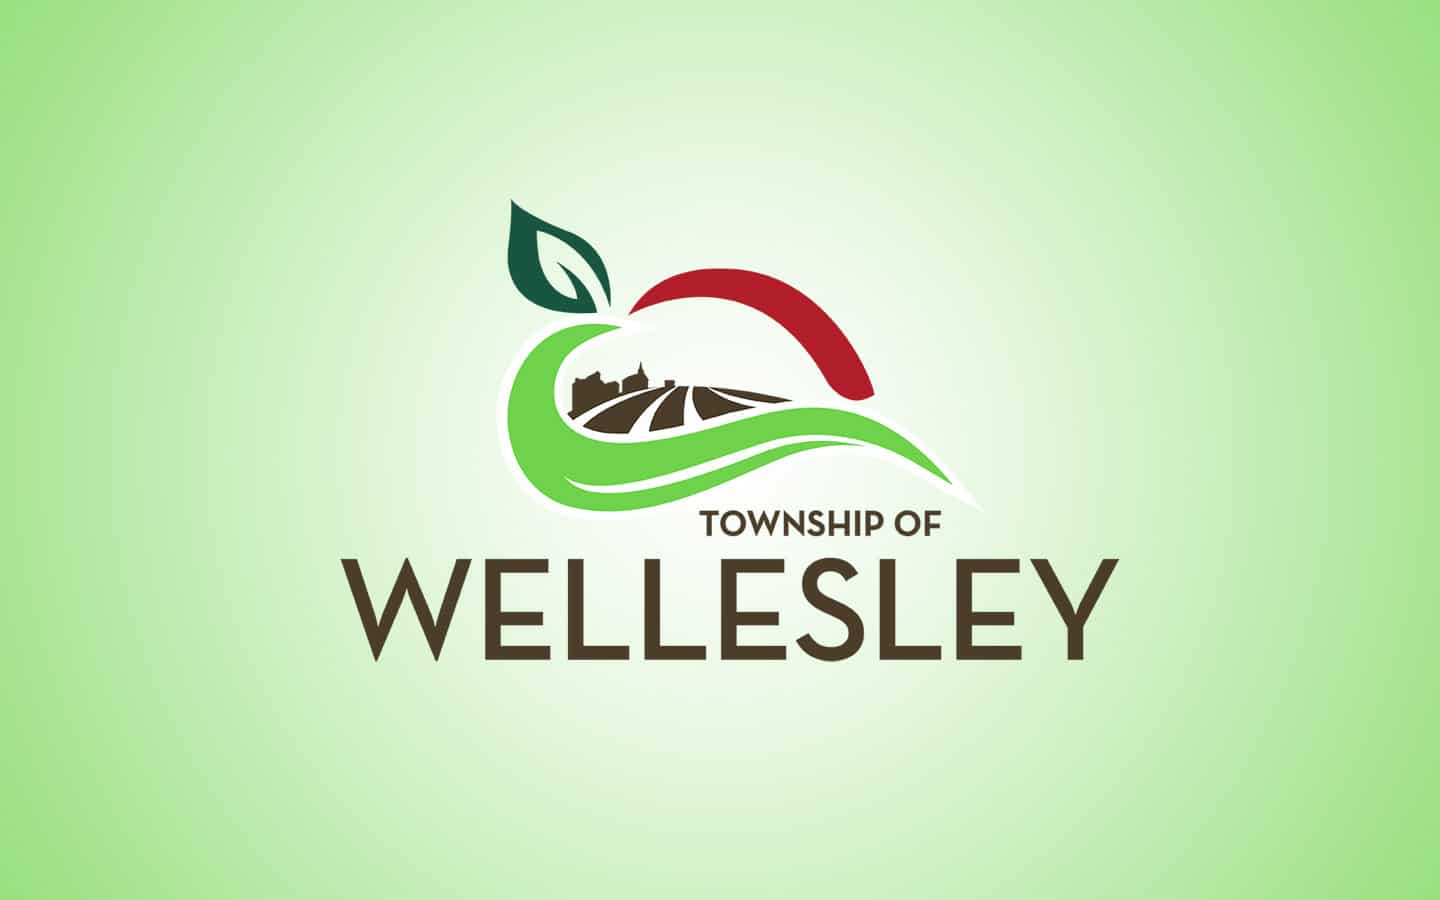                      Wellesley approves 2022 budget with 5.2% tax increase                             
                     